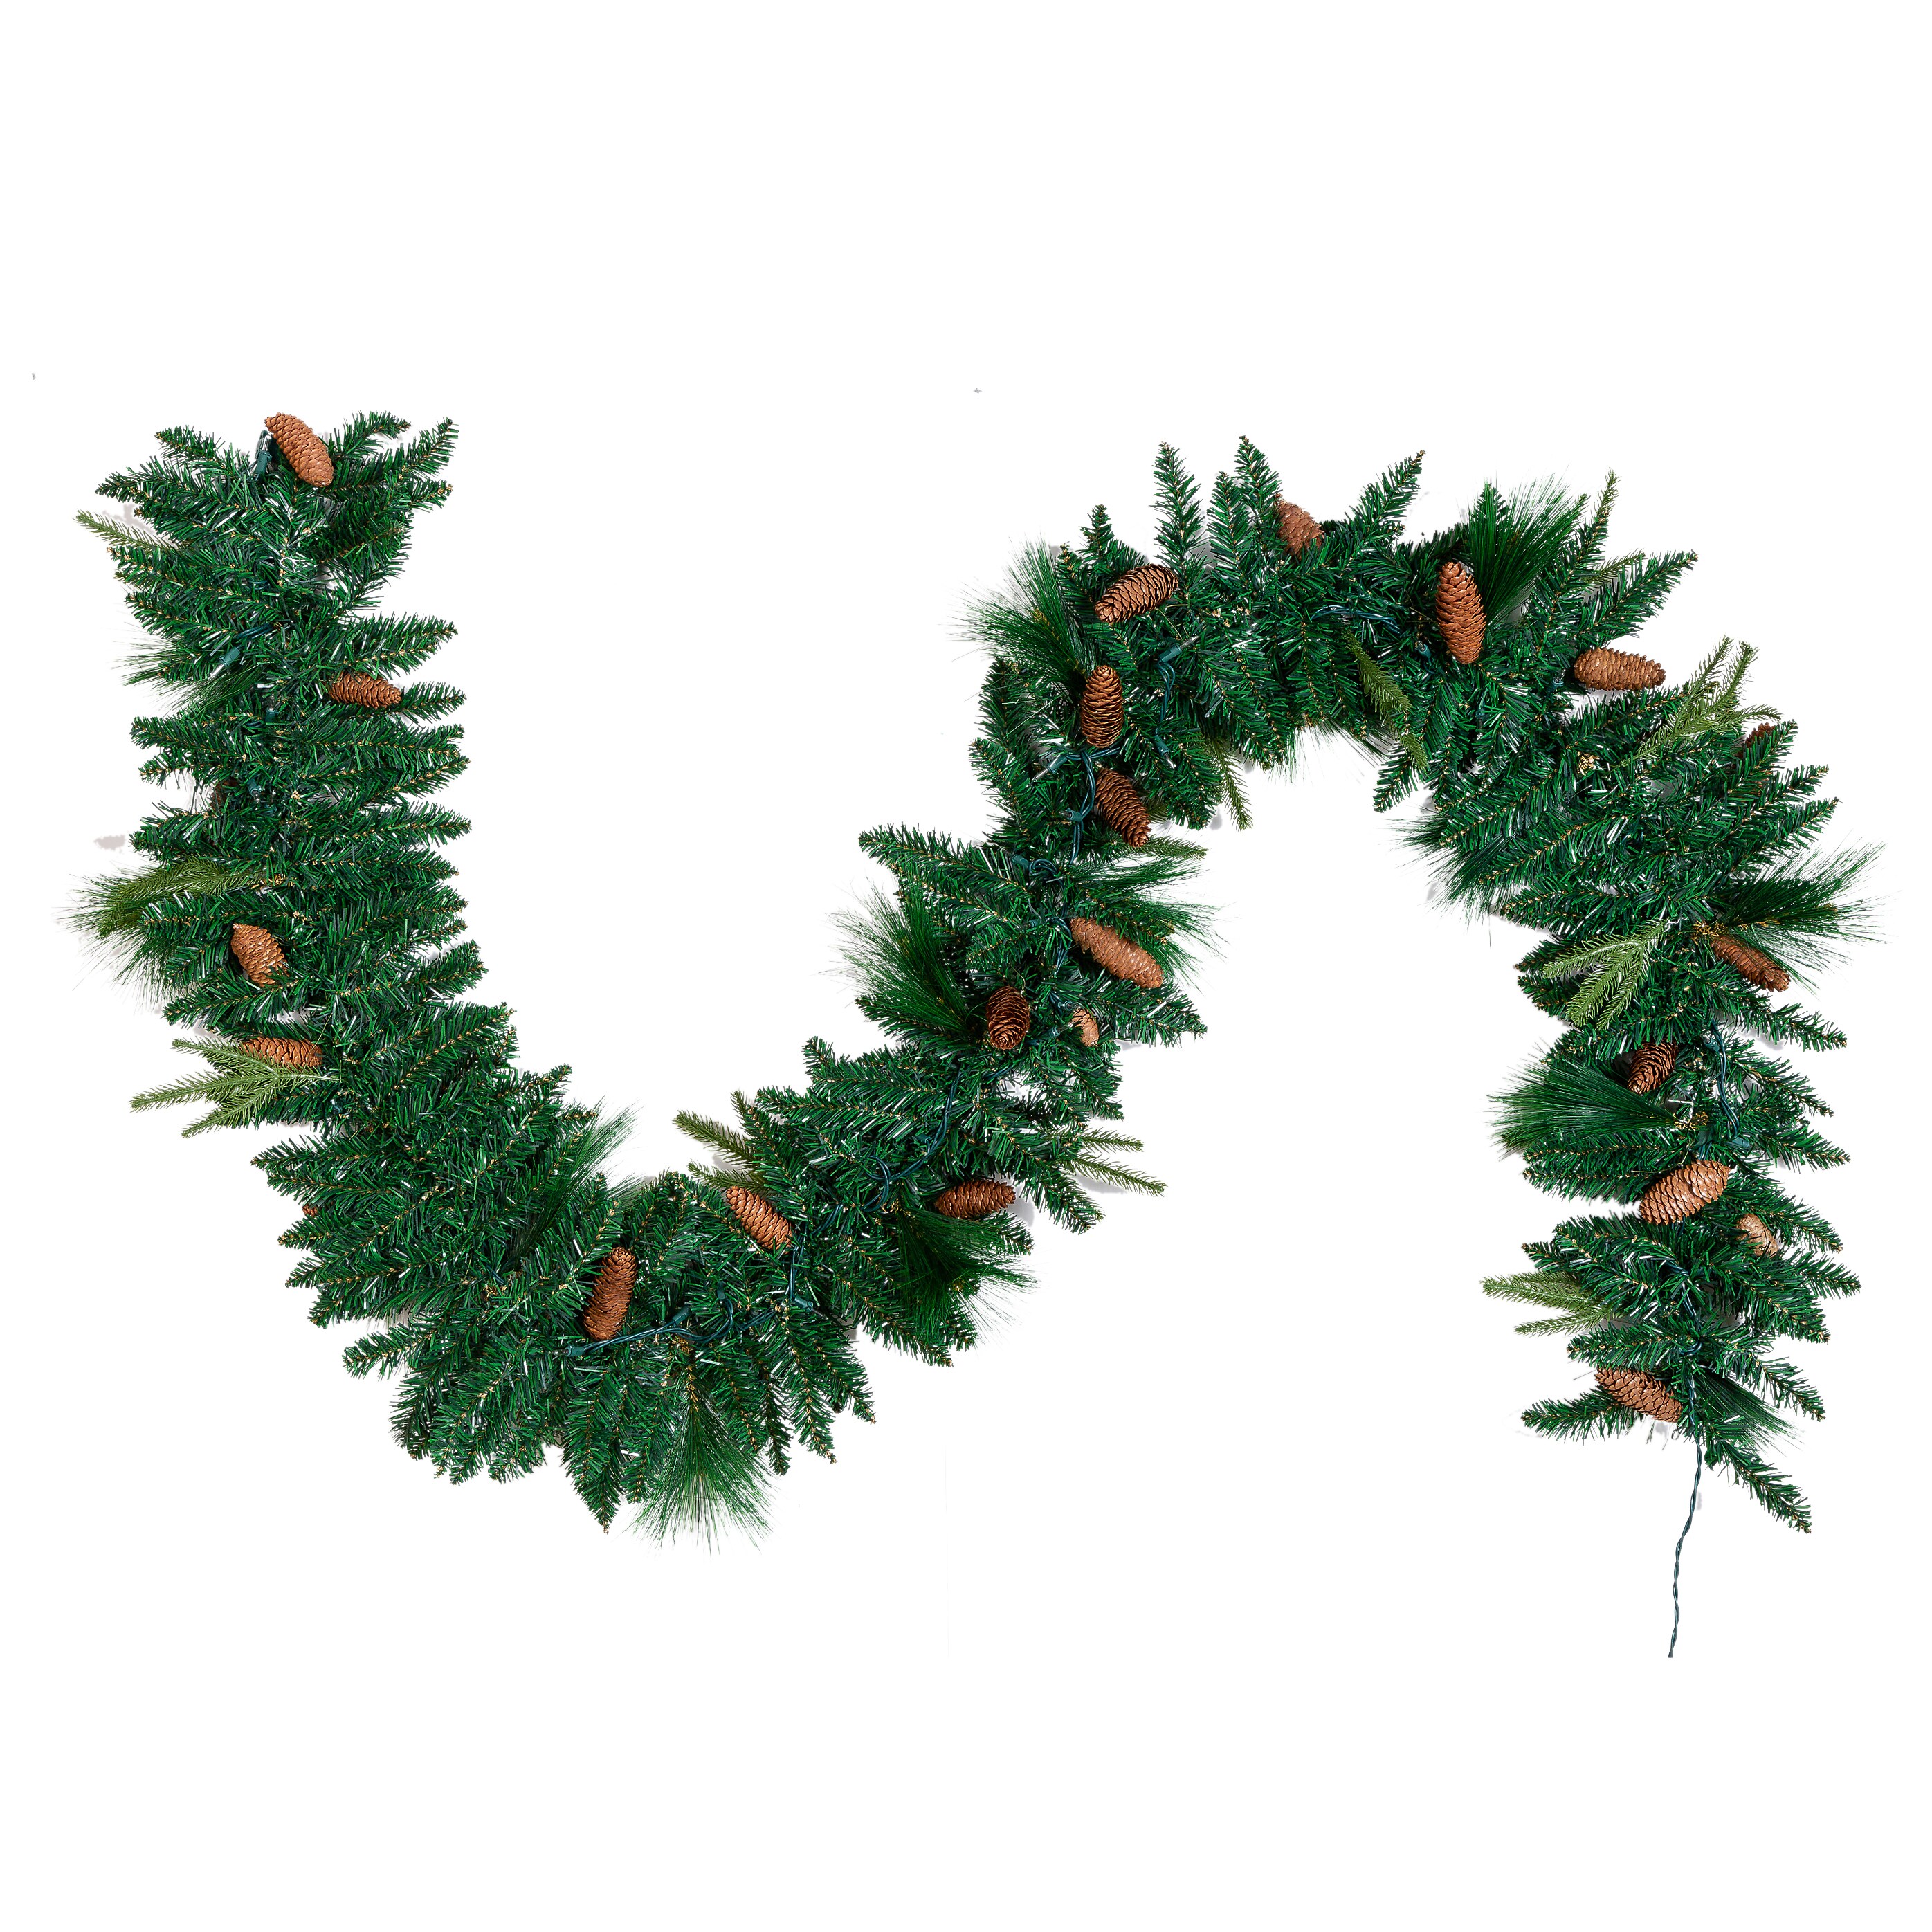 Christmas House 15 FT Wired Holiday Green Pine Garland Decor Indoor/Outdoor 